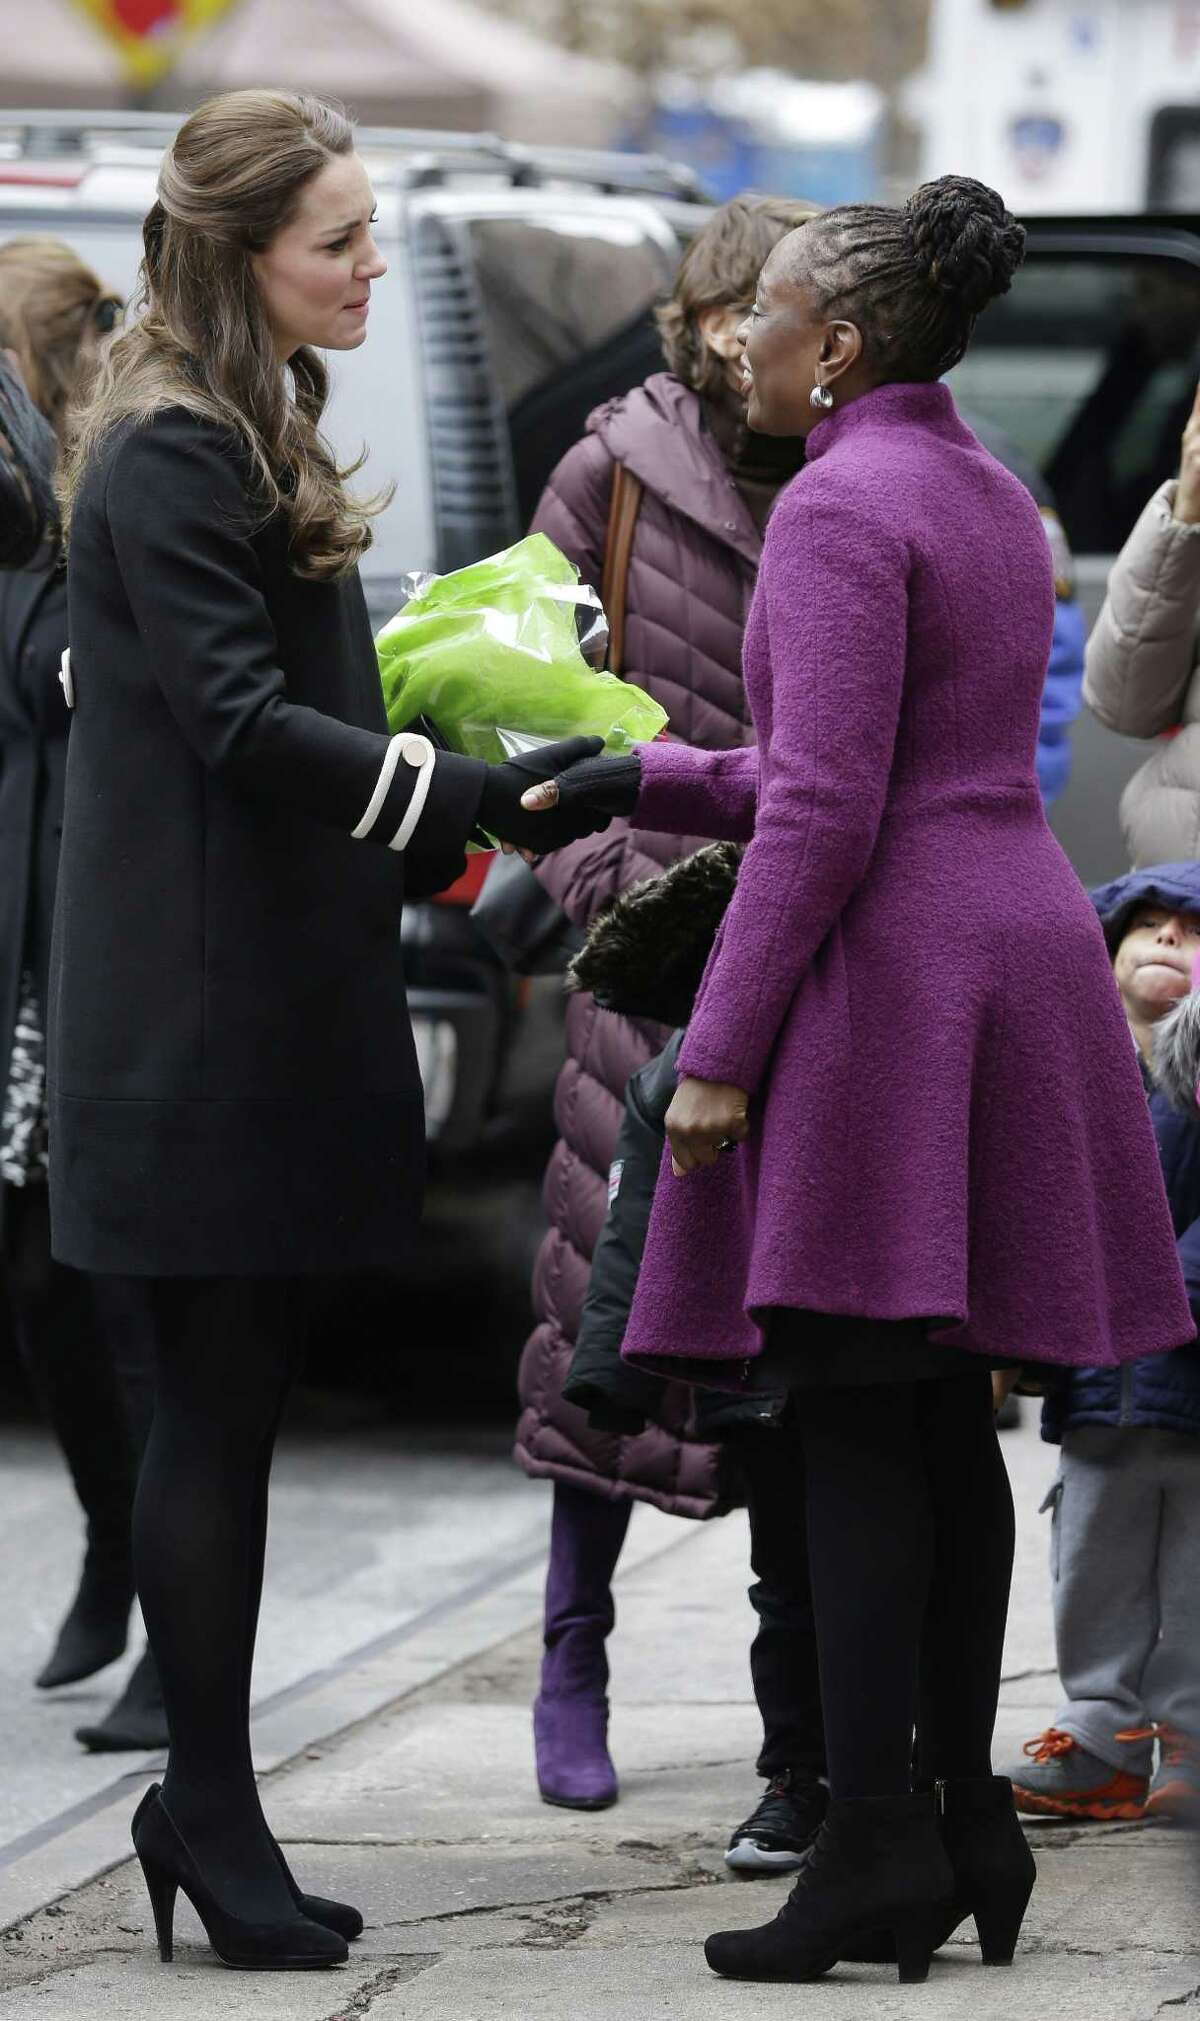 Kate Middleton, the Duchess of Cambridge, left, shakes hands with Chirlane McCray, wife of New York City Mayor Bill de Blasio, after leaving the Northside Center for Childhood Development in New York, Monday, Dec. 8, 2014. (AP Photo/Seth Wenig, Pool)